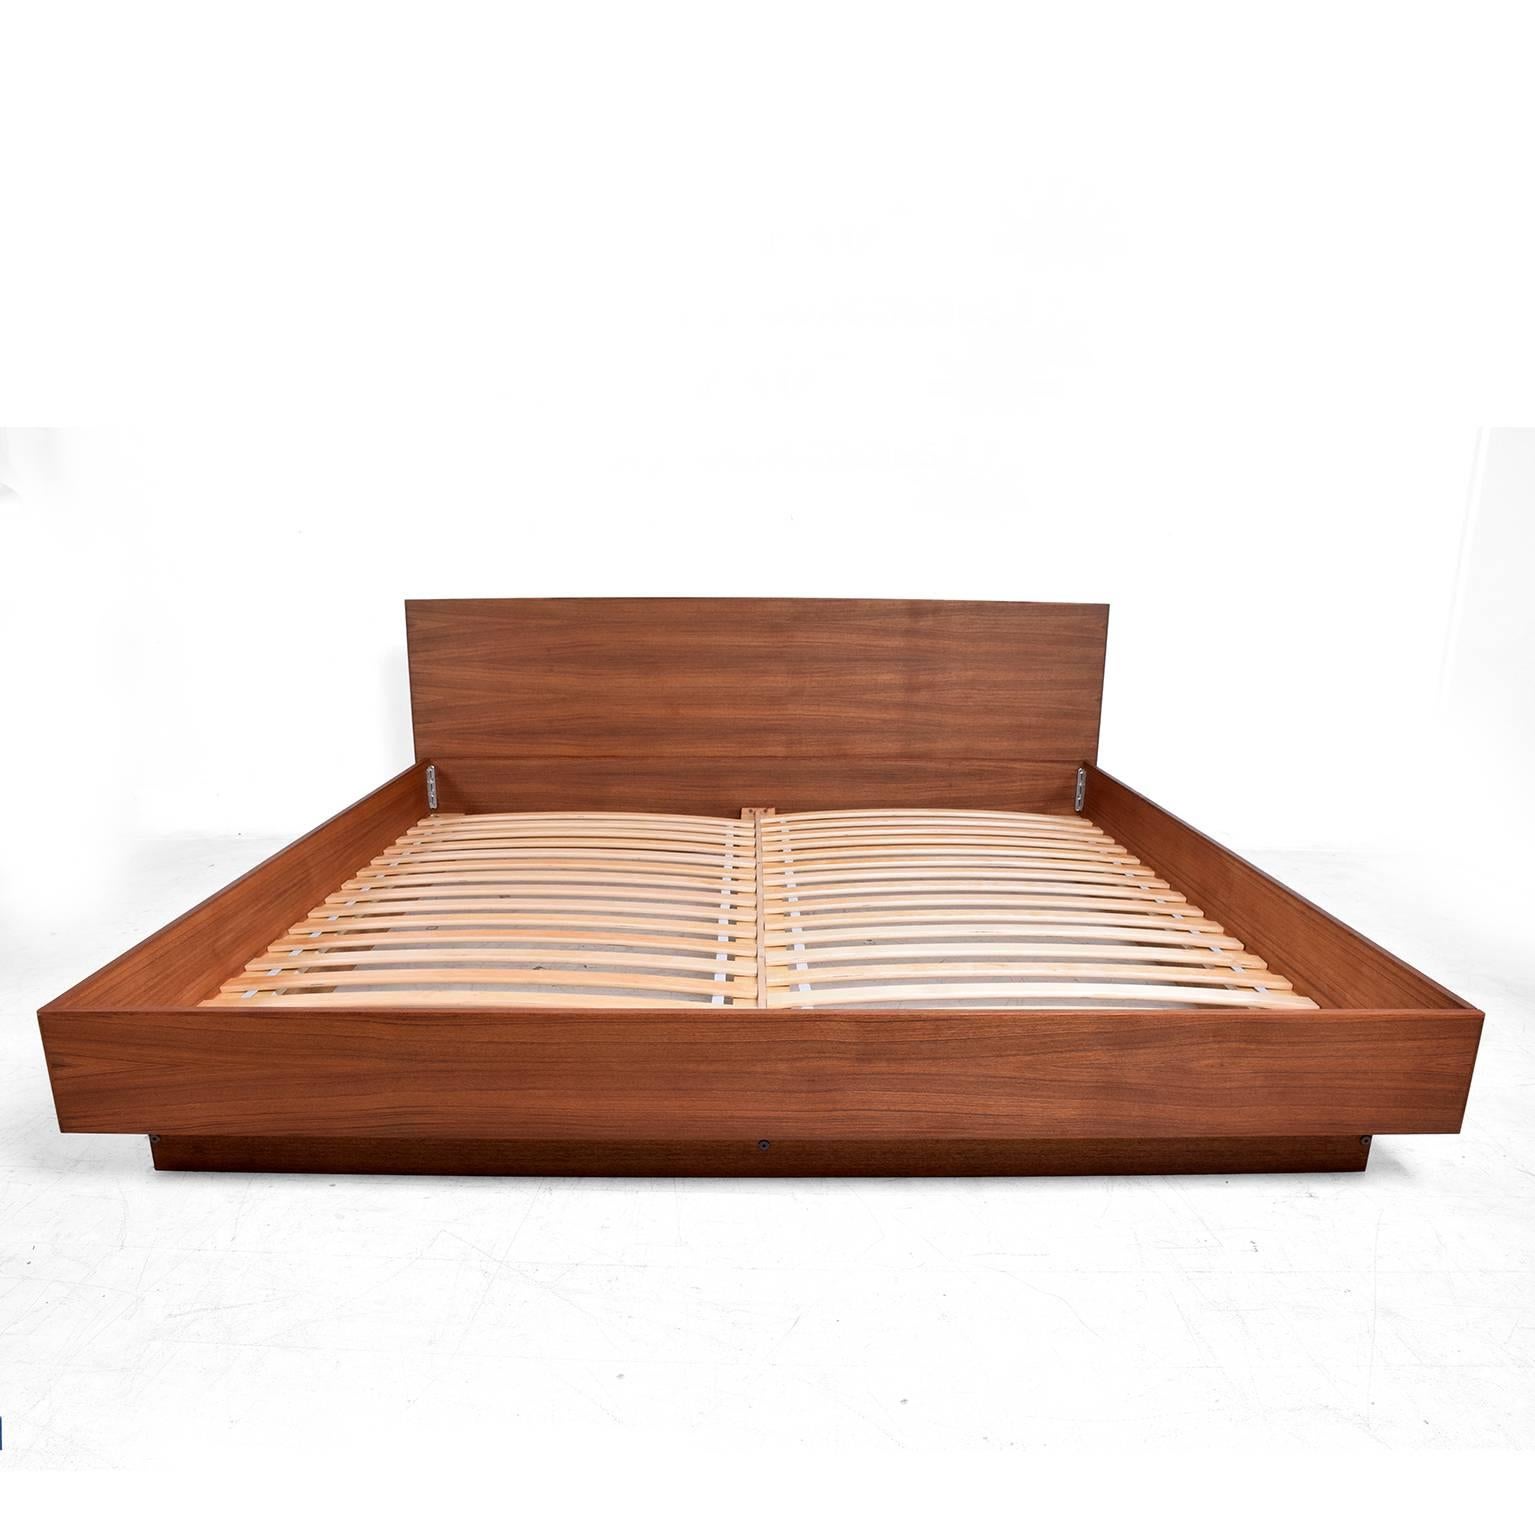 Custom walnut bed made in California, Designed by Pablo Romo.
Made to order